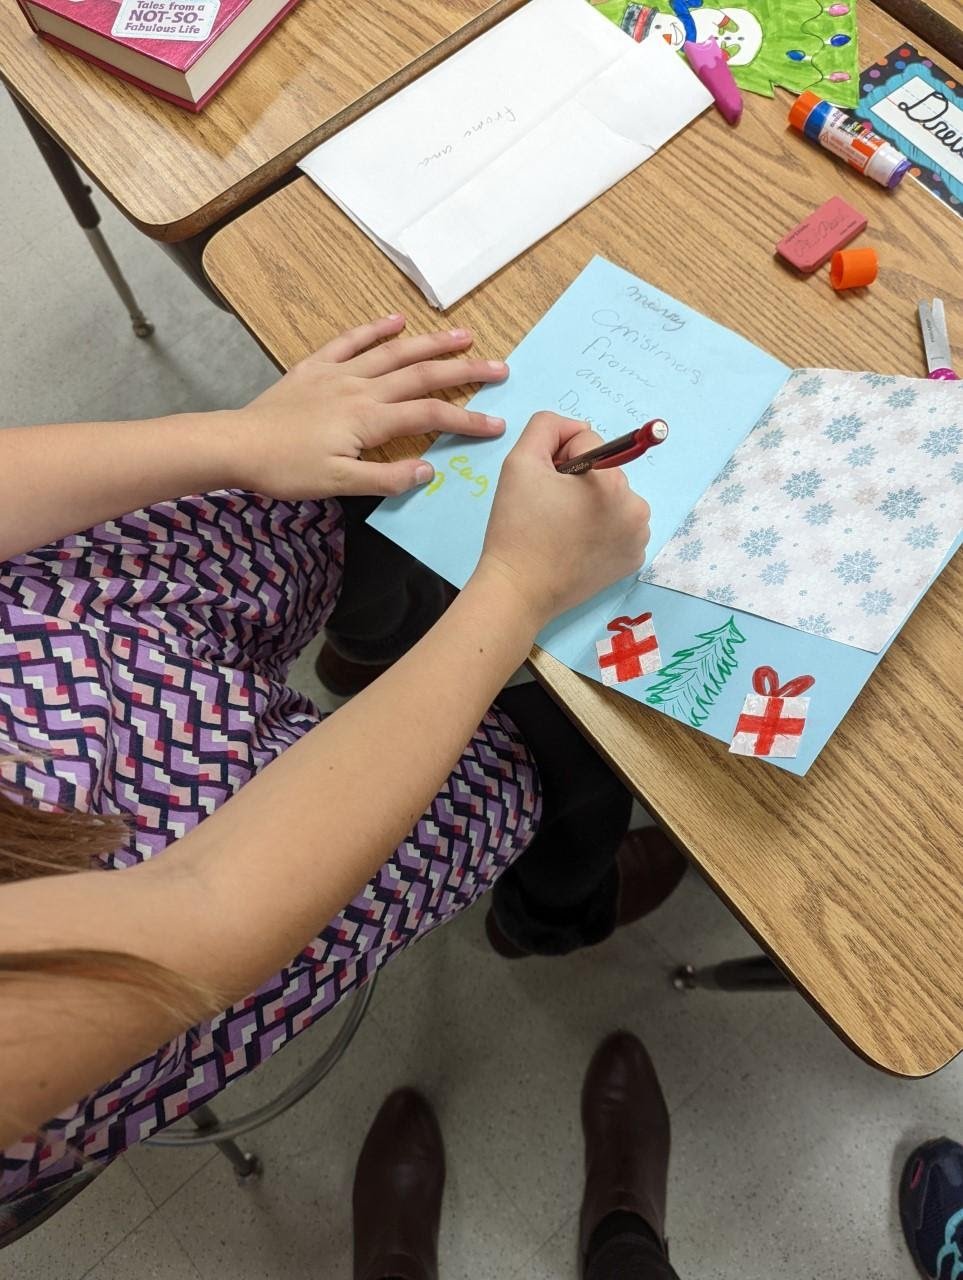 Kids designed cards for nursing home and adult home residents.